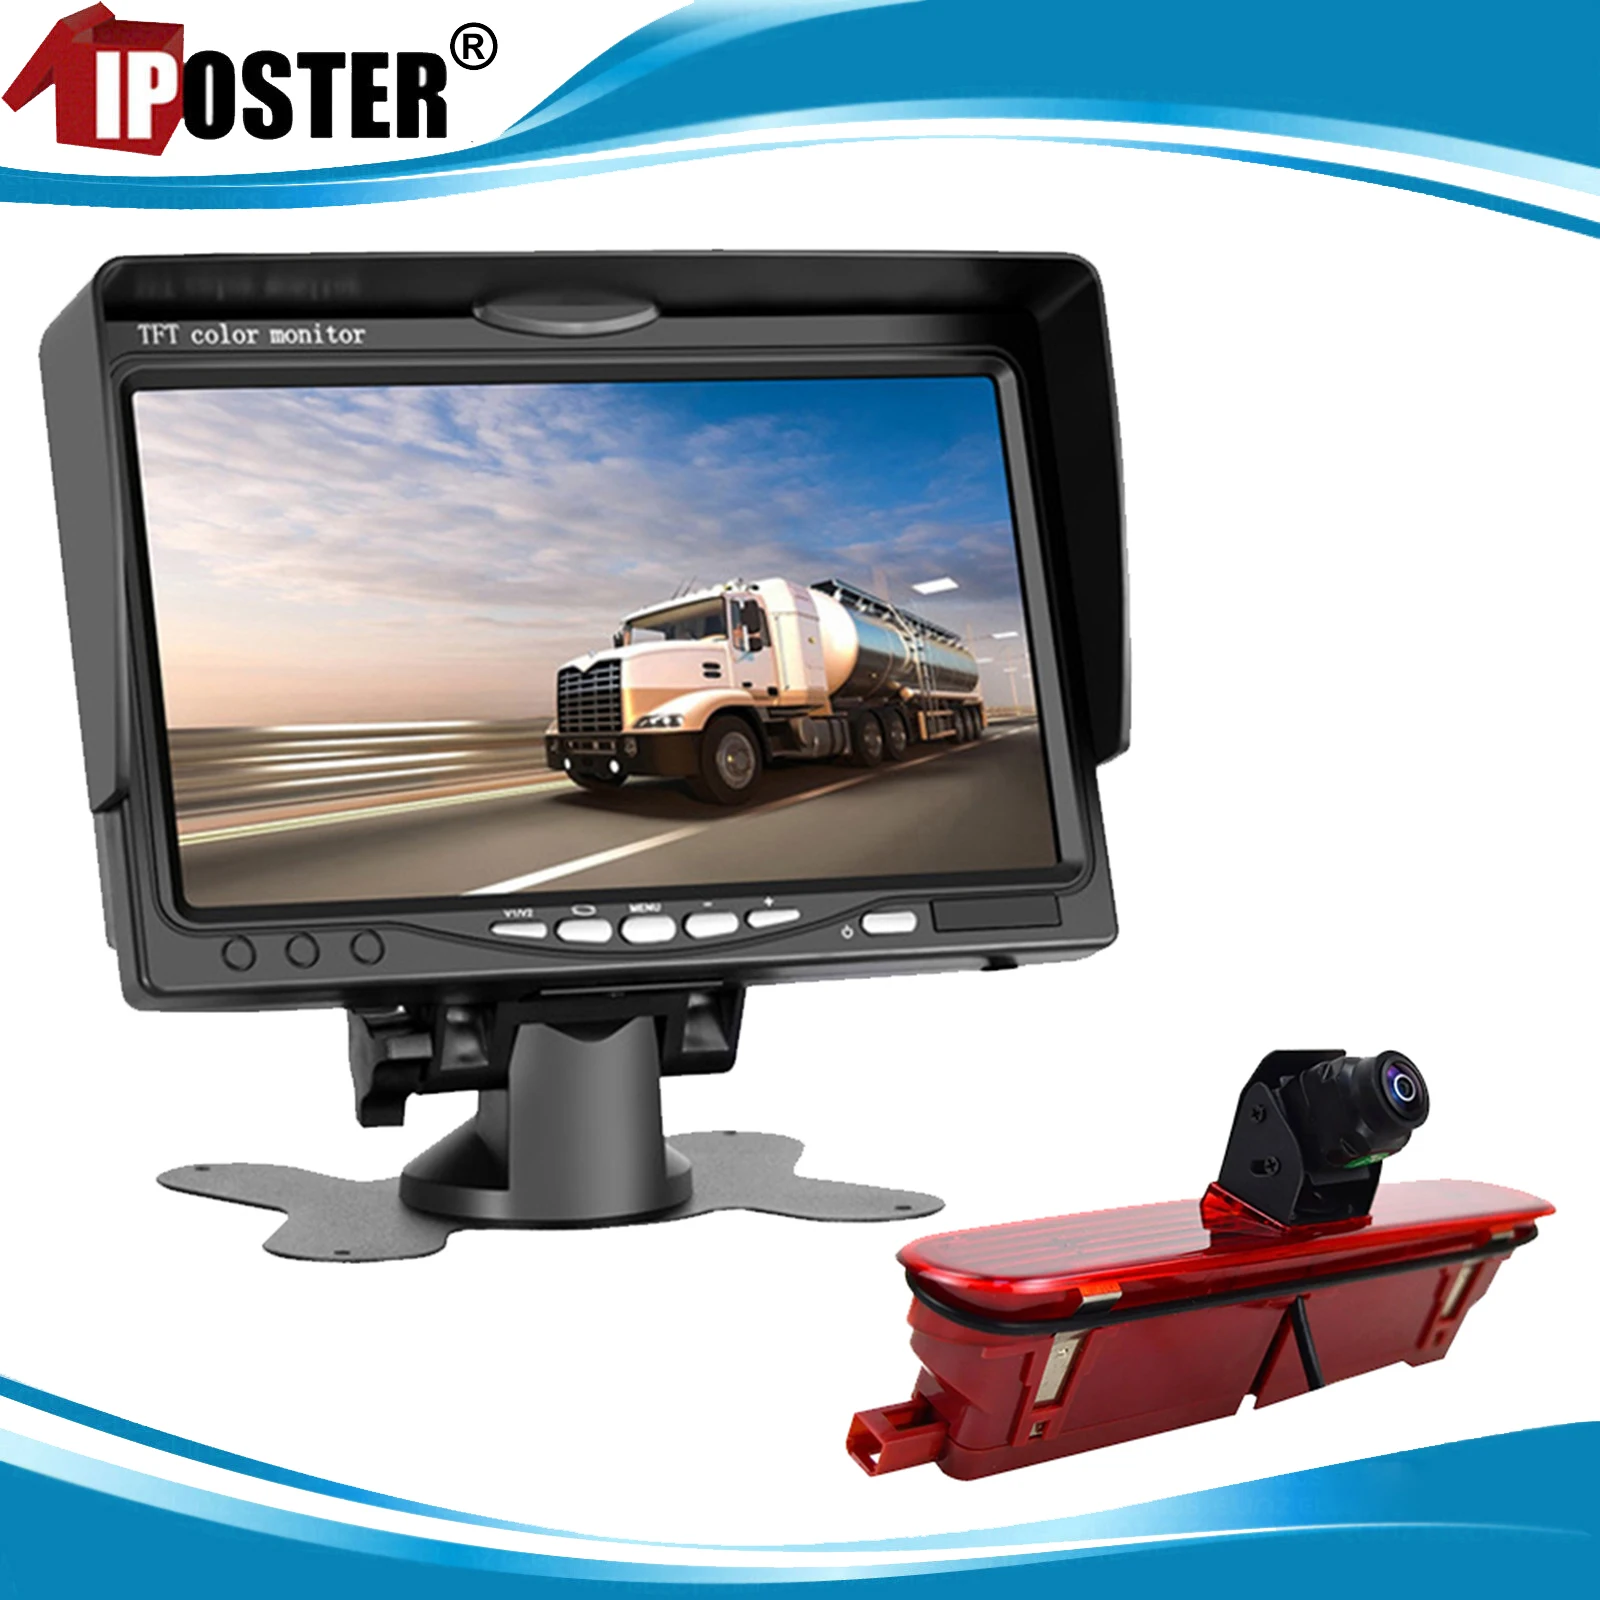 

iPoster 7" Car Monitor AHD 1080P Car Rear View Camera Reversing High Level Brake Waterproof For Fiat Doblo Vauxhall Combo